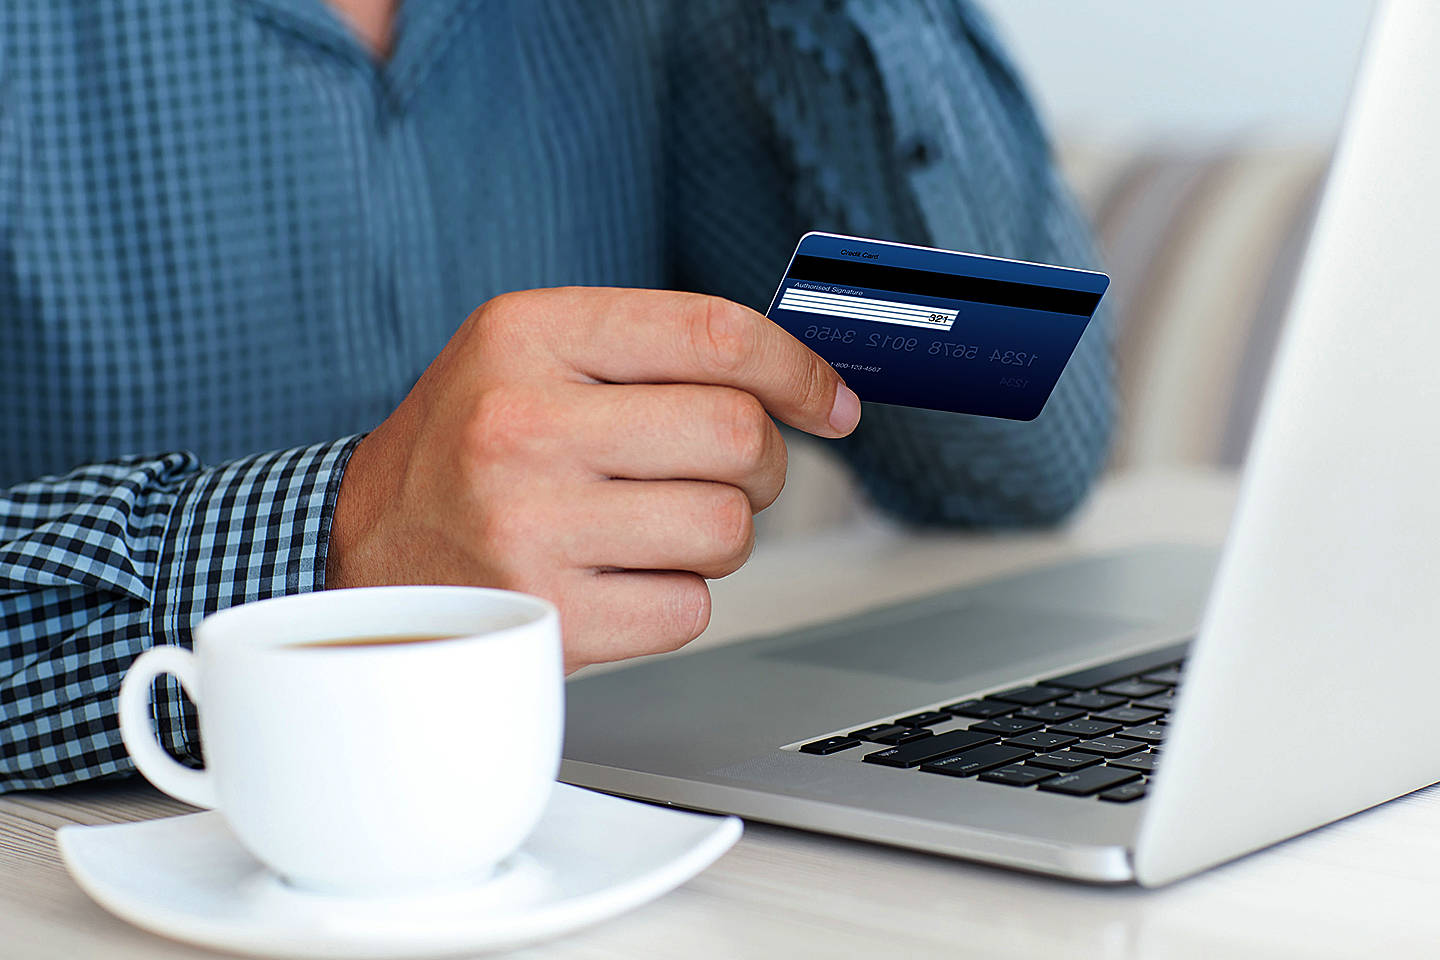 Shopping online? Think twice before storing your card information, experts say